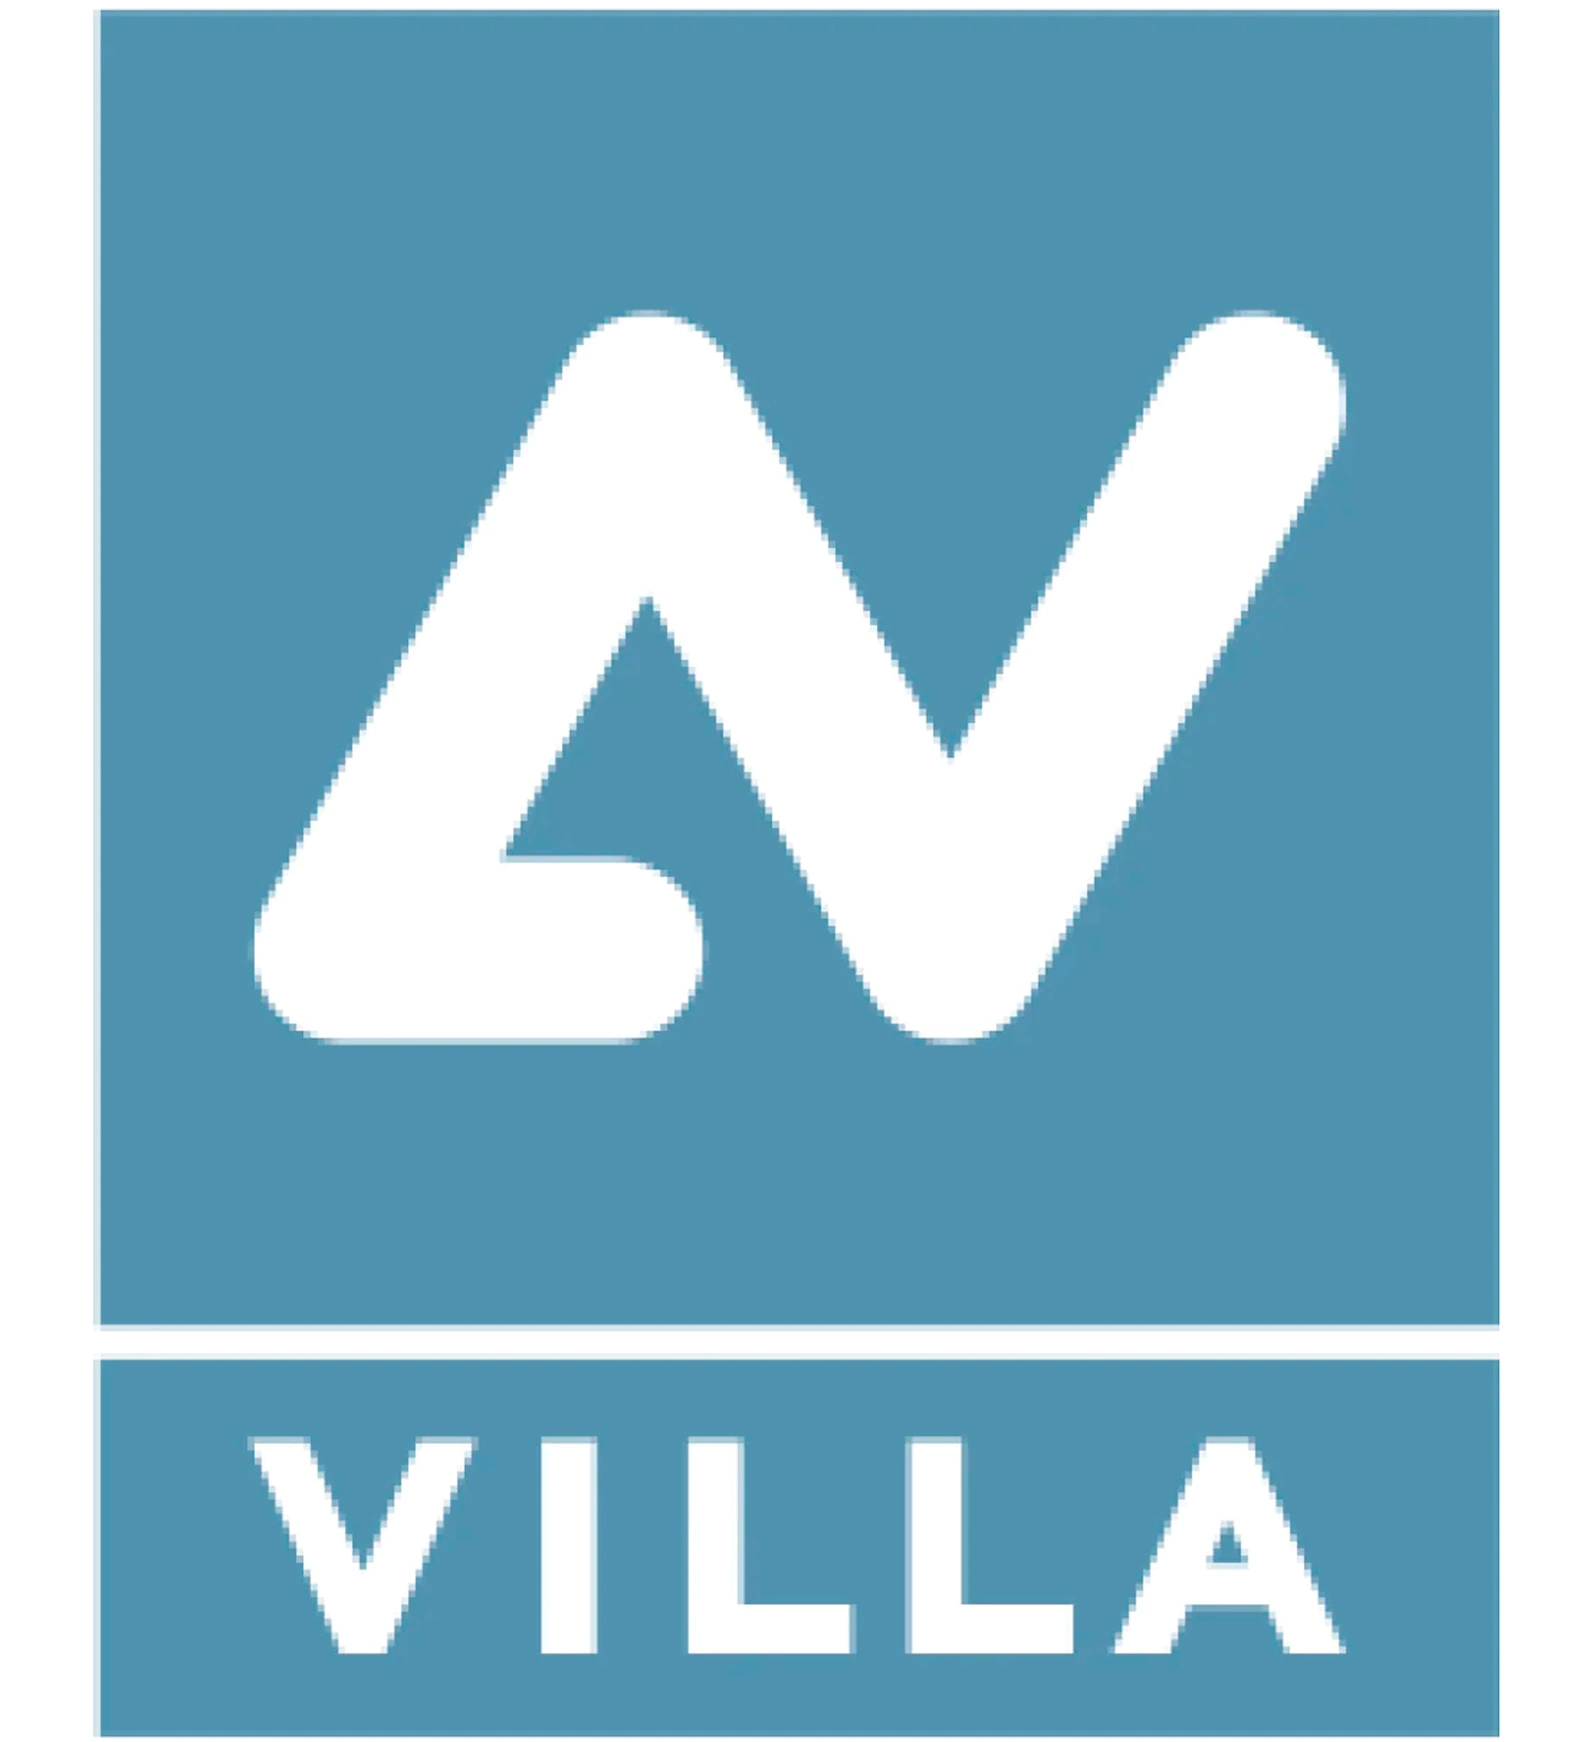 <div><strong>Villa Sistemi Medicali </strong>is following the path of a production based on high-tech, constant research and scientific development. Founded in 1958 by Mr. Alfio Villa and headquartered in Buccinasco (Italy), it started as a company committed to the development of diagnostic radiology systems. Following the merge of several companies managed by Gruppo Villa, such as Eurostrazza, Fiad, Fao and Joint, Villa Sistemi Medicali was established in 1990 as reference pole able to value specific experience acquired in different sectors.<br><br>Nowadays <strong>Villa Sistemi Medicali</strong> continues to be driven by dynamic entrepreneurial spirit, advanced concepts, centralized services and diversified production as key features allowing the rise of the company to domestic and international markets. The establishment of a rigorous Quality System, the rising scientific commitment in research and application fields, as well as a deep marketing knowledge of customers needs, grant the consolidation of the company as important Italian manufacturer of radiological devices and as one of the European leaders, with an extensive<strong> distribution network worldwide (more than 90 countries).&nbsp;</strong></div>